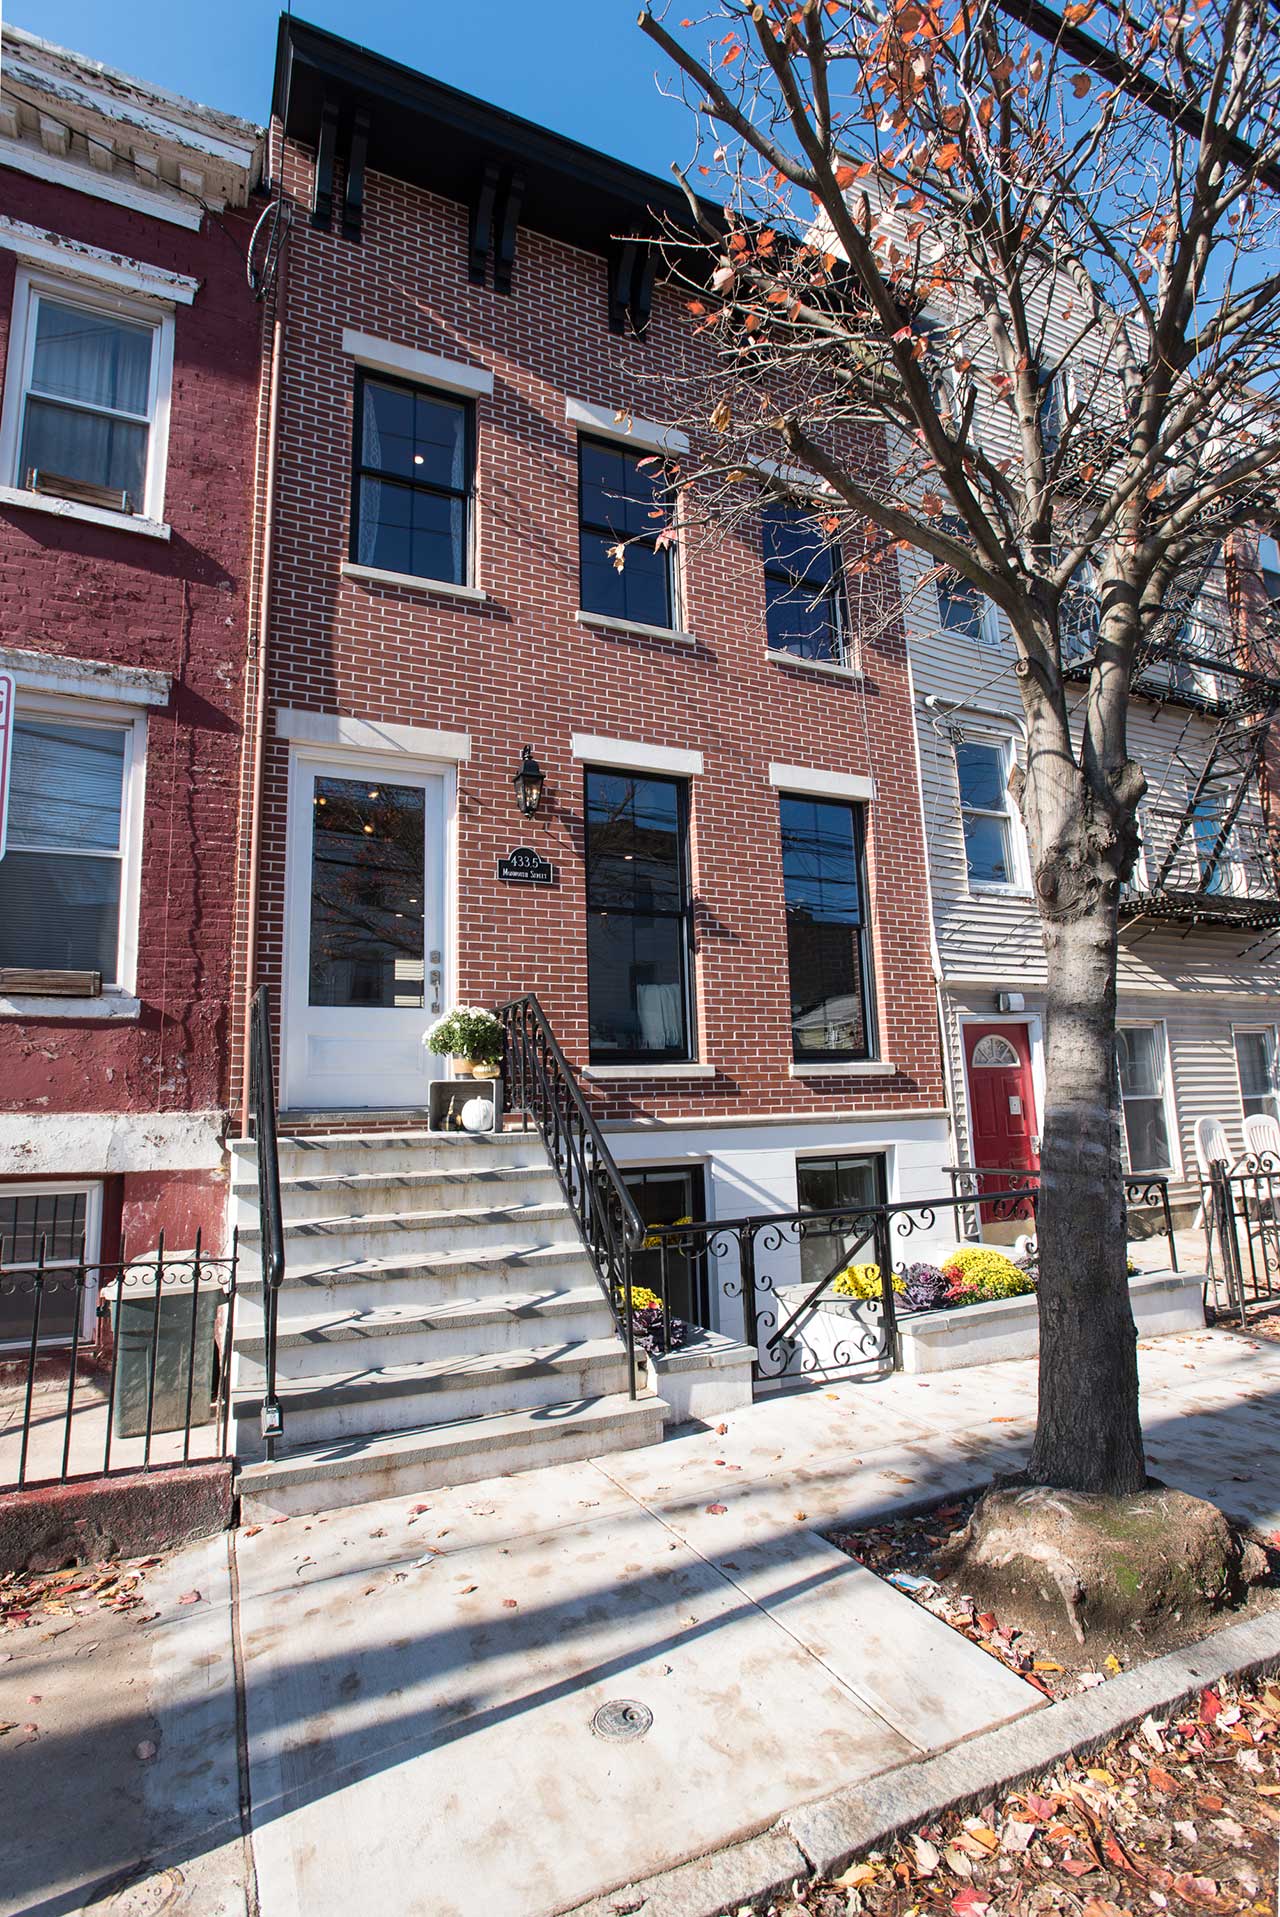 433.5 Monmouth Street Townhome For Sale Jersey City Ext